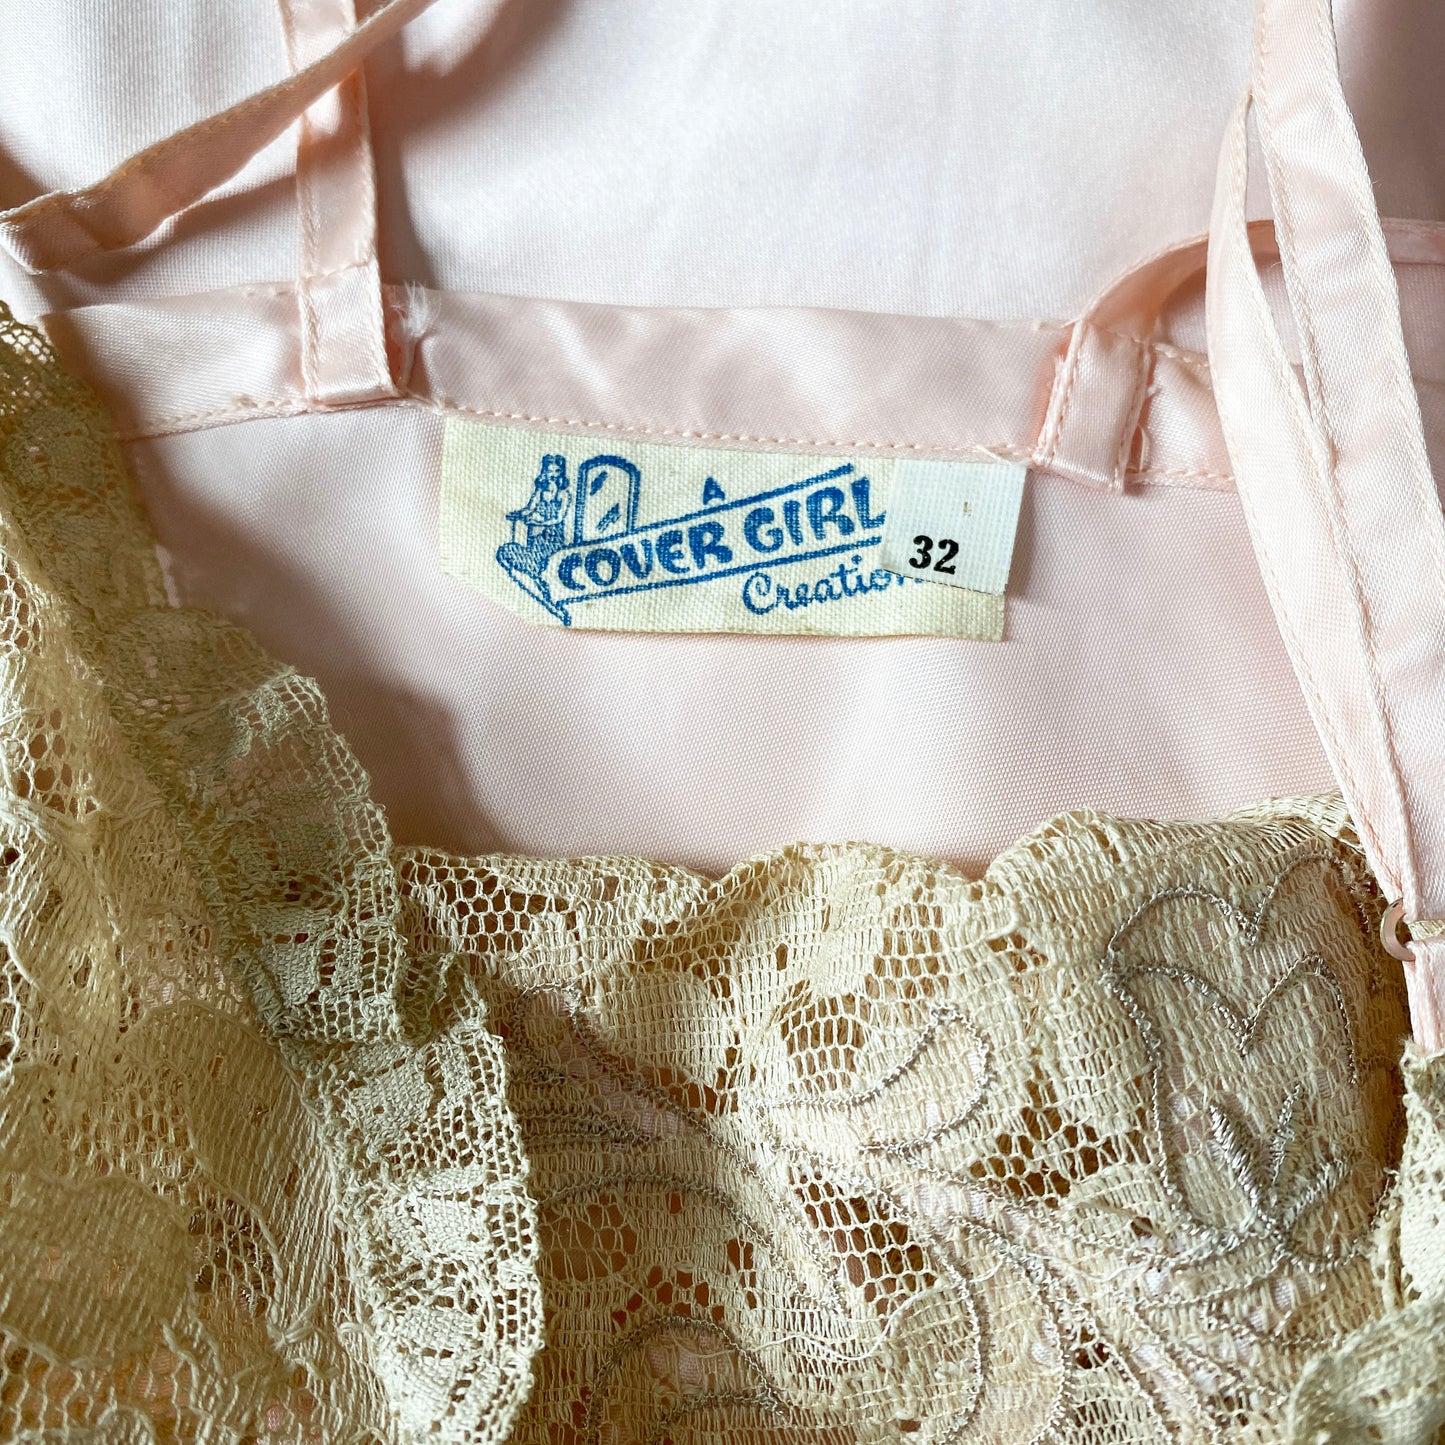 1940s Blush Pink Bias Cut Silky Rayon Nightgown with Lace Trim Slip Embroidery Pin Up Sexy / Cover Girl / Extra Small